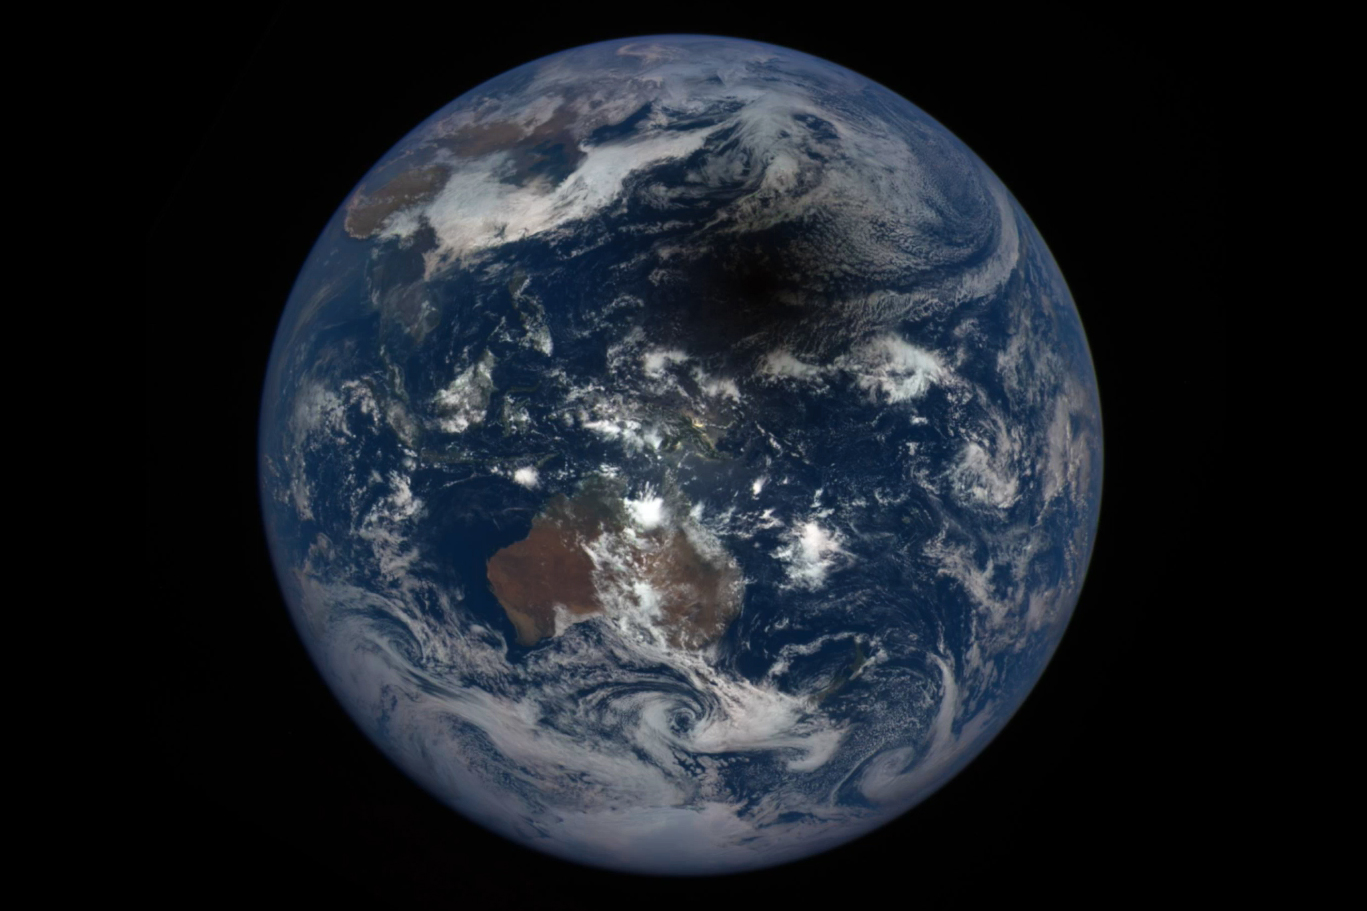 Earth Looks Bruised In The Shadow Of The Eclipse